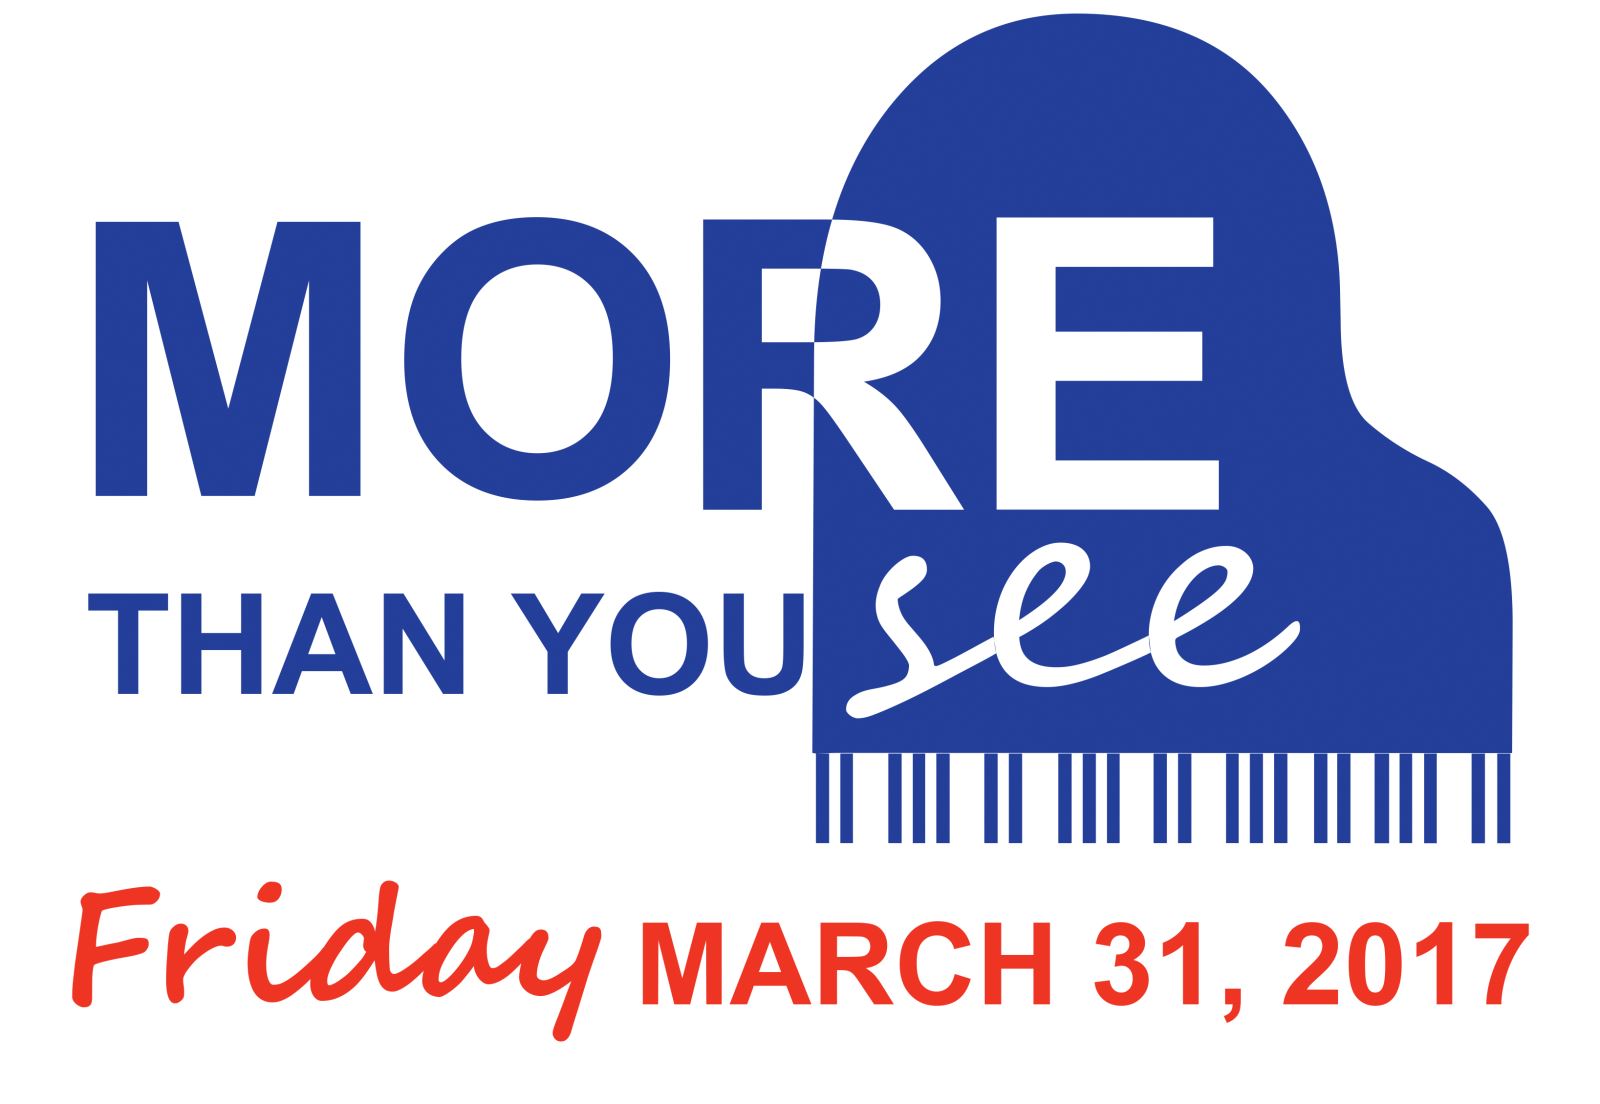 More Than You See 2017 - Use Code EARLYBIRD to Get Your Discounted Tickets